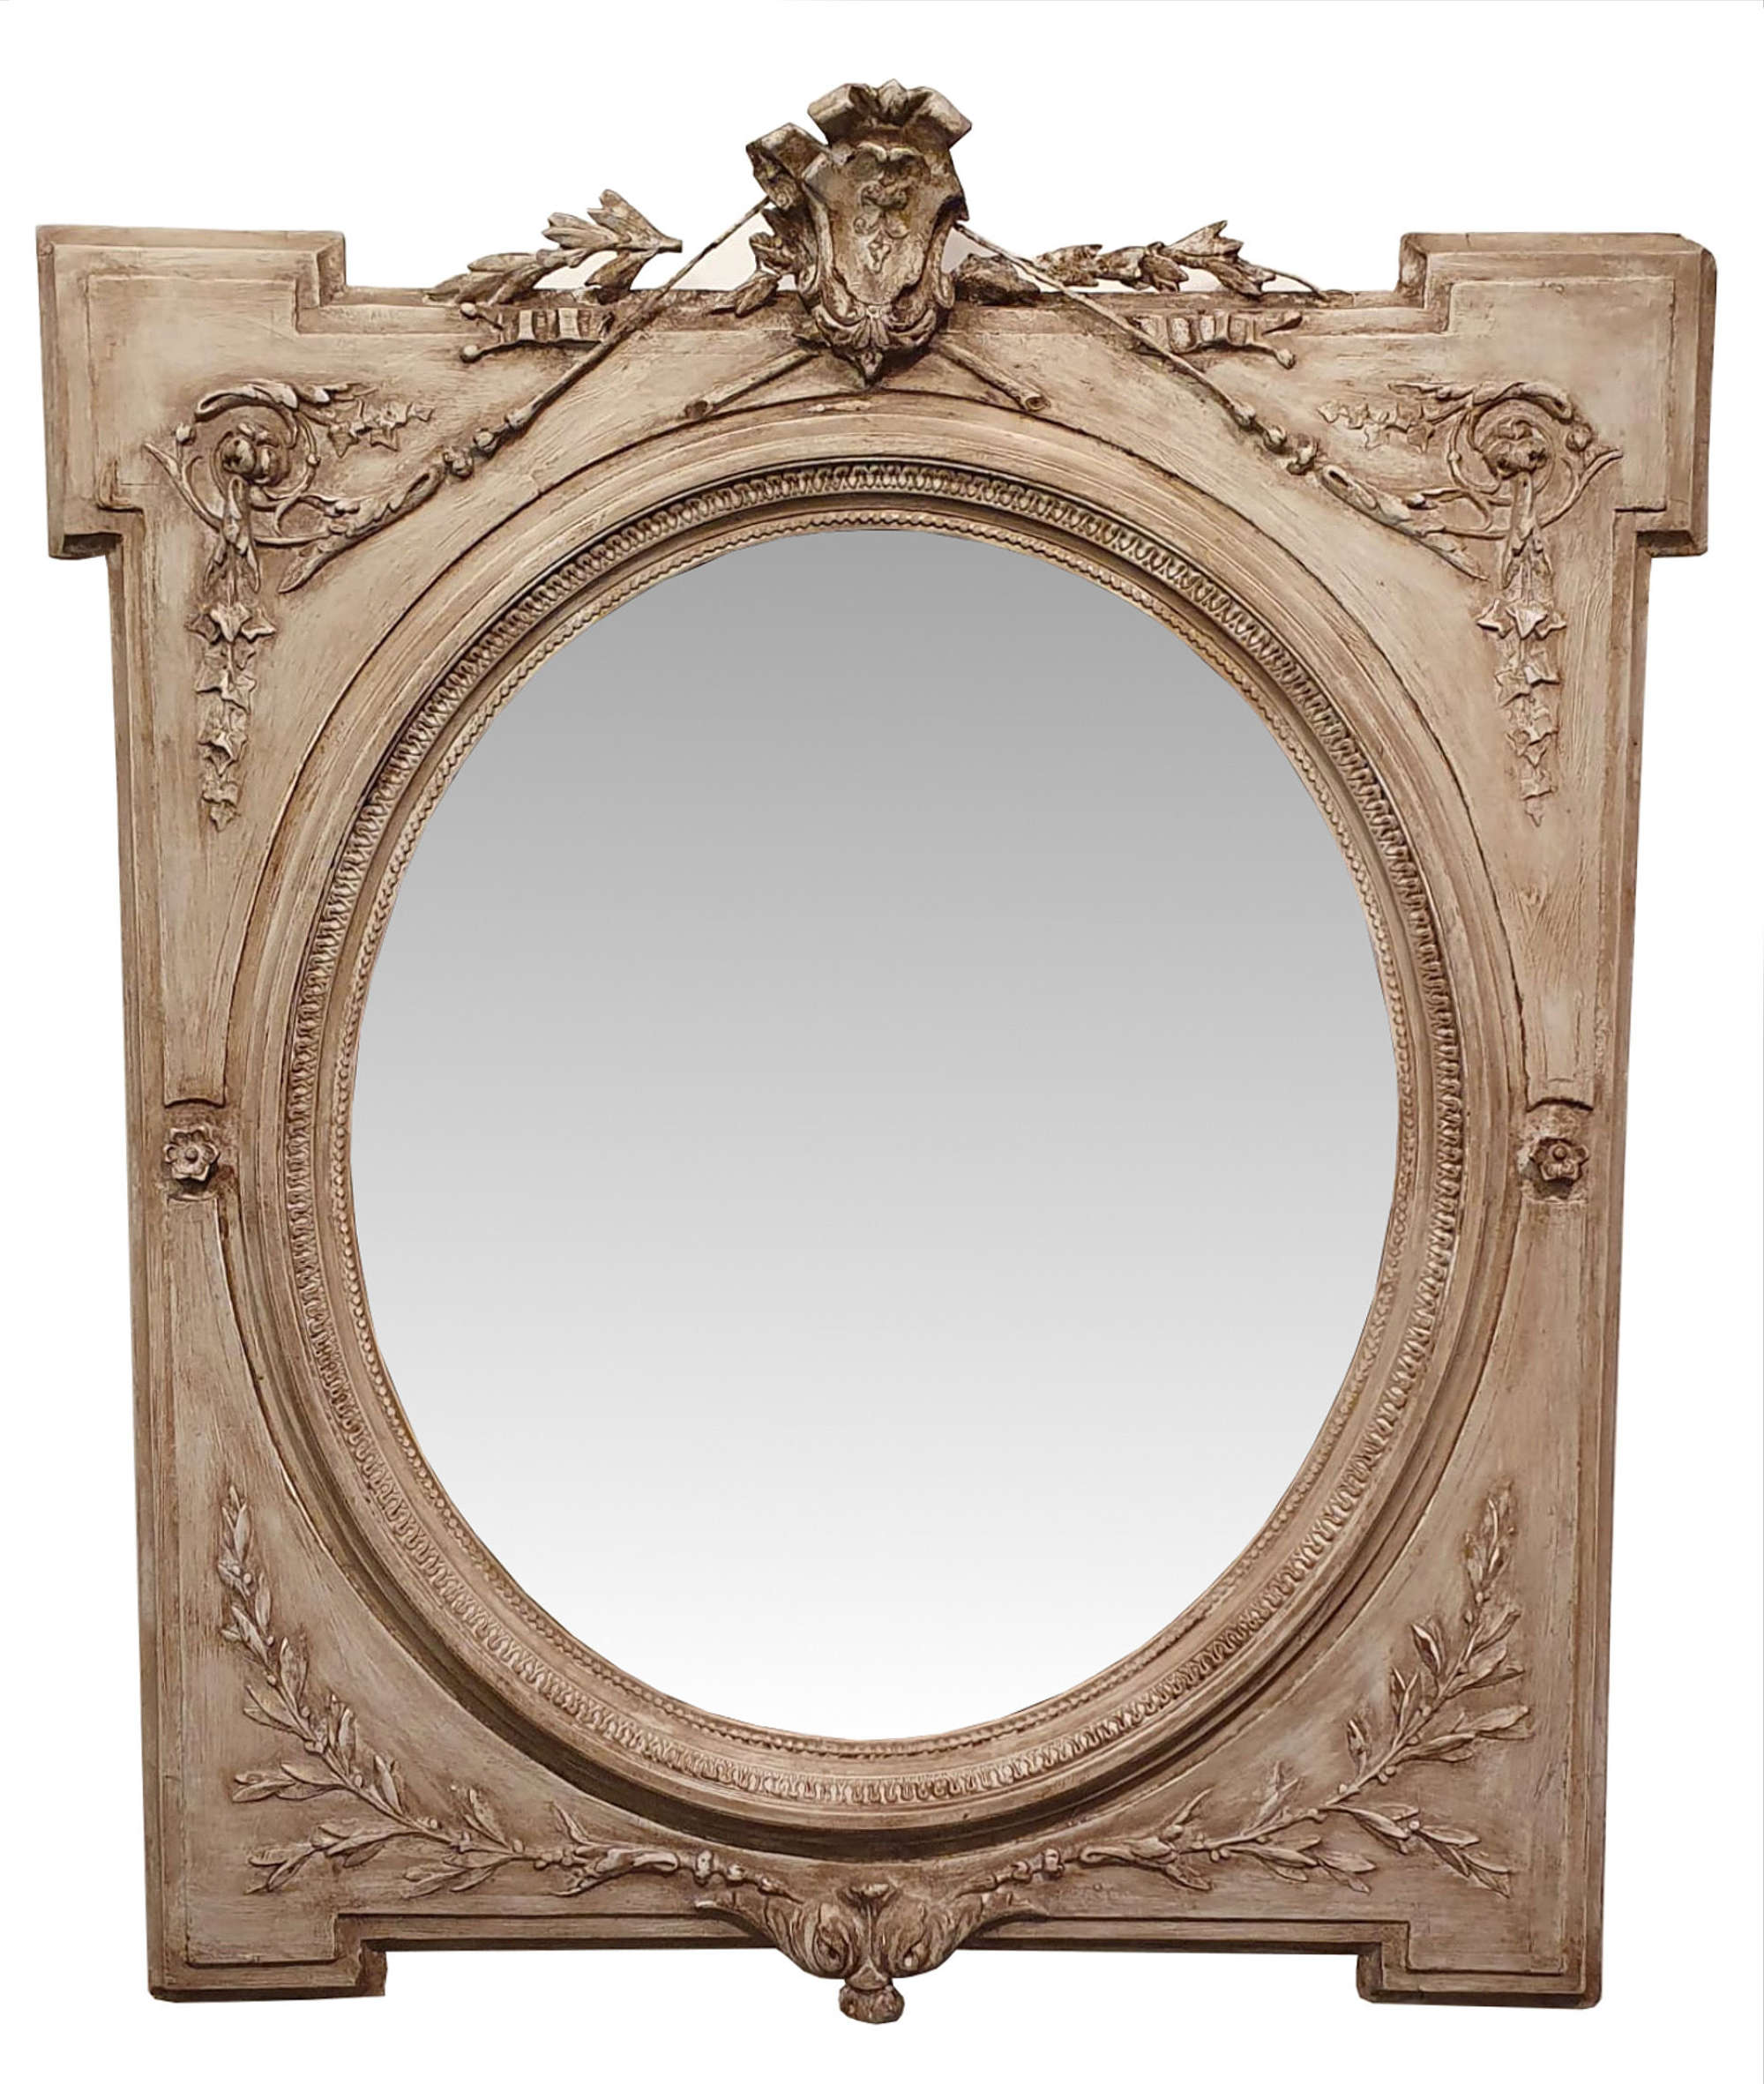 19th Century Oval Framed Painted Antique Mirror